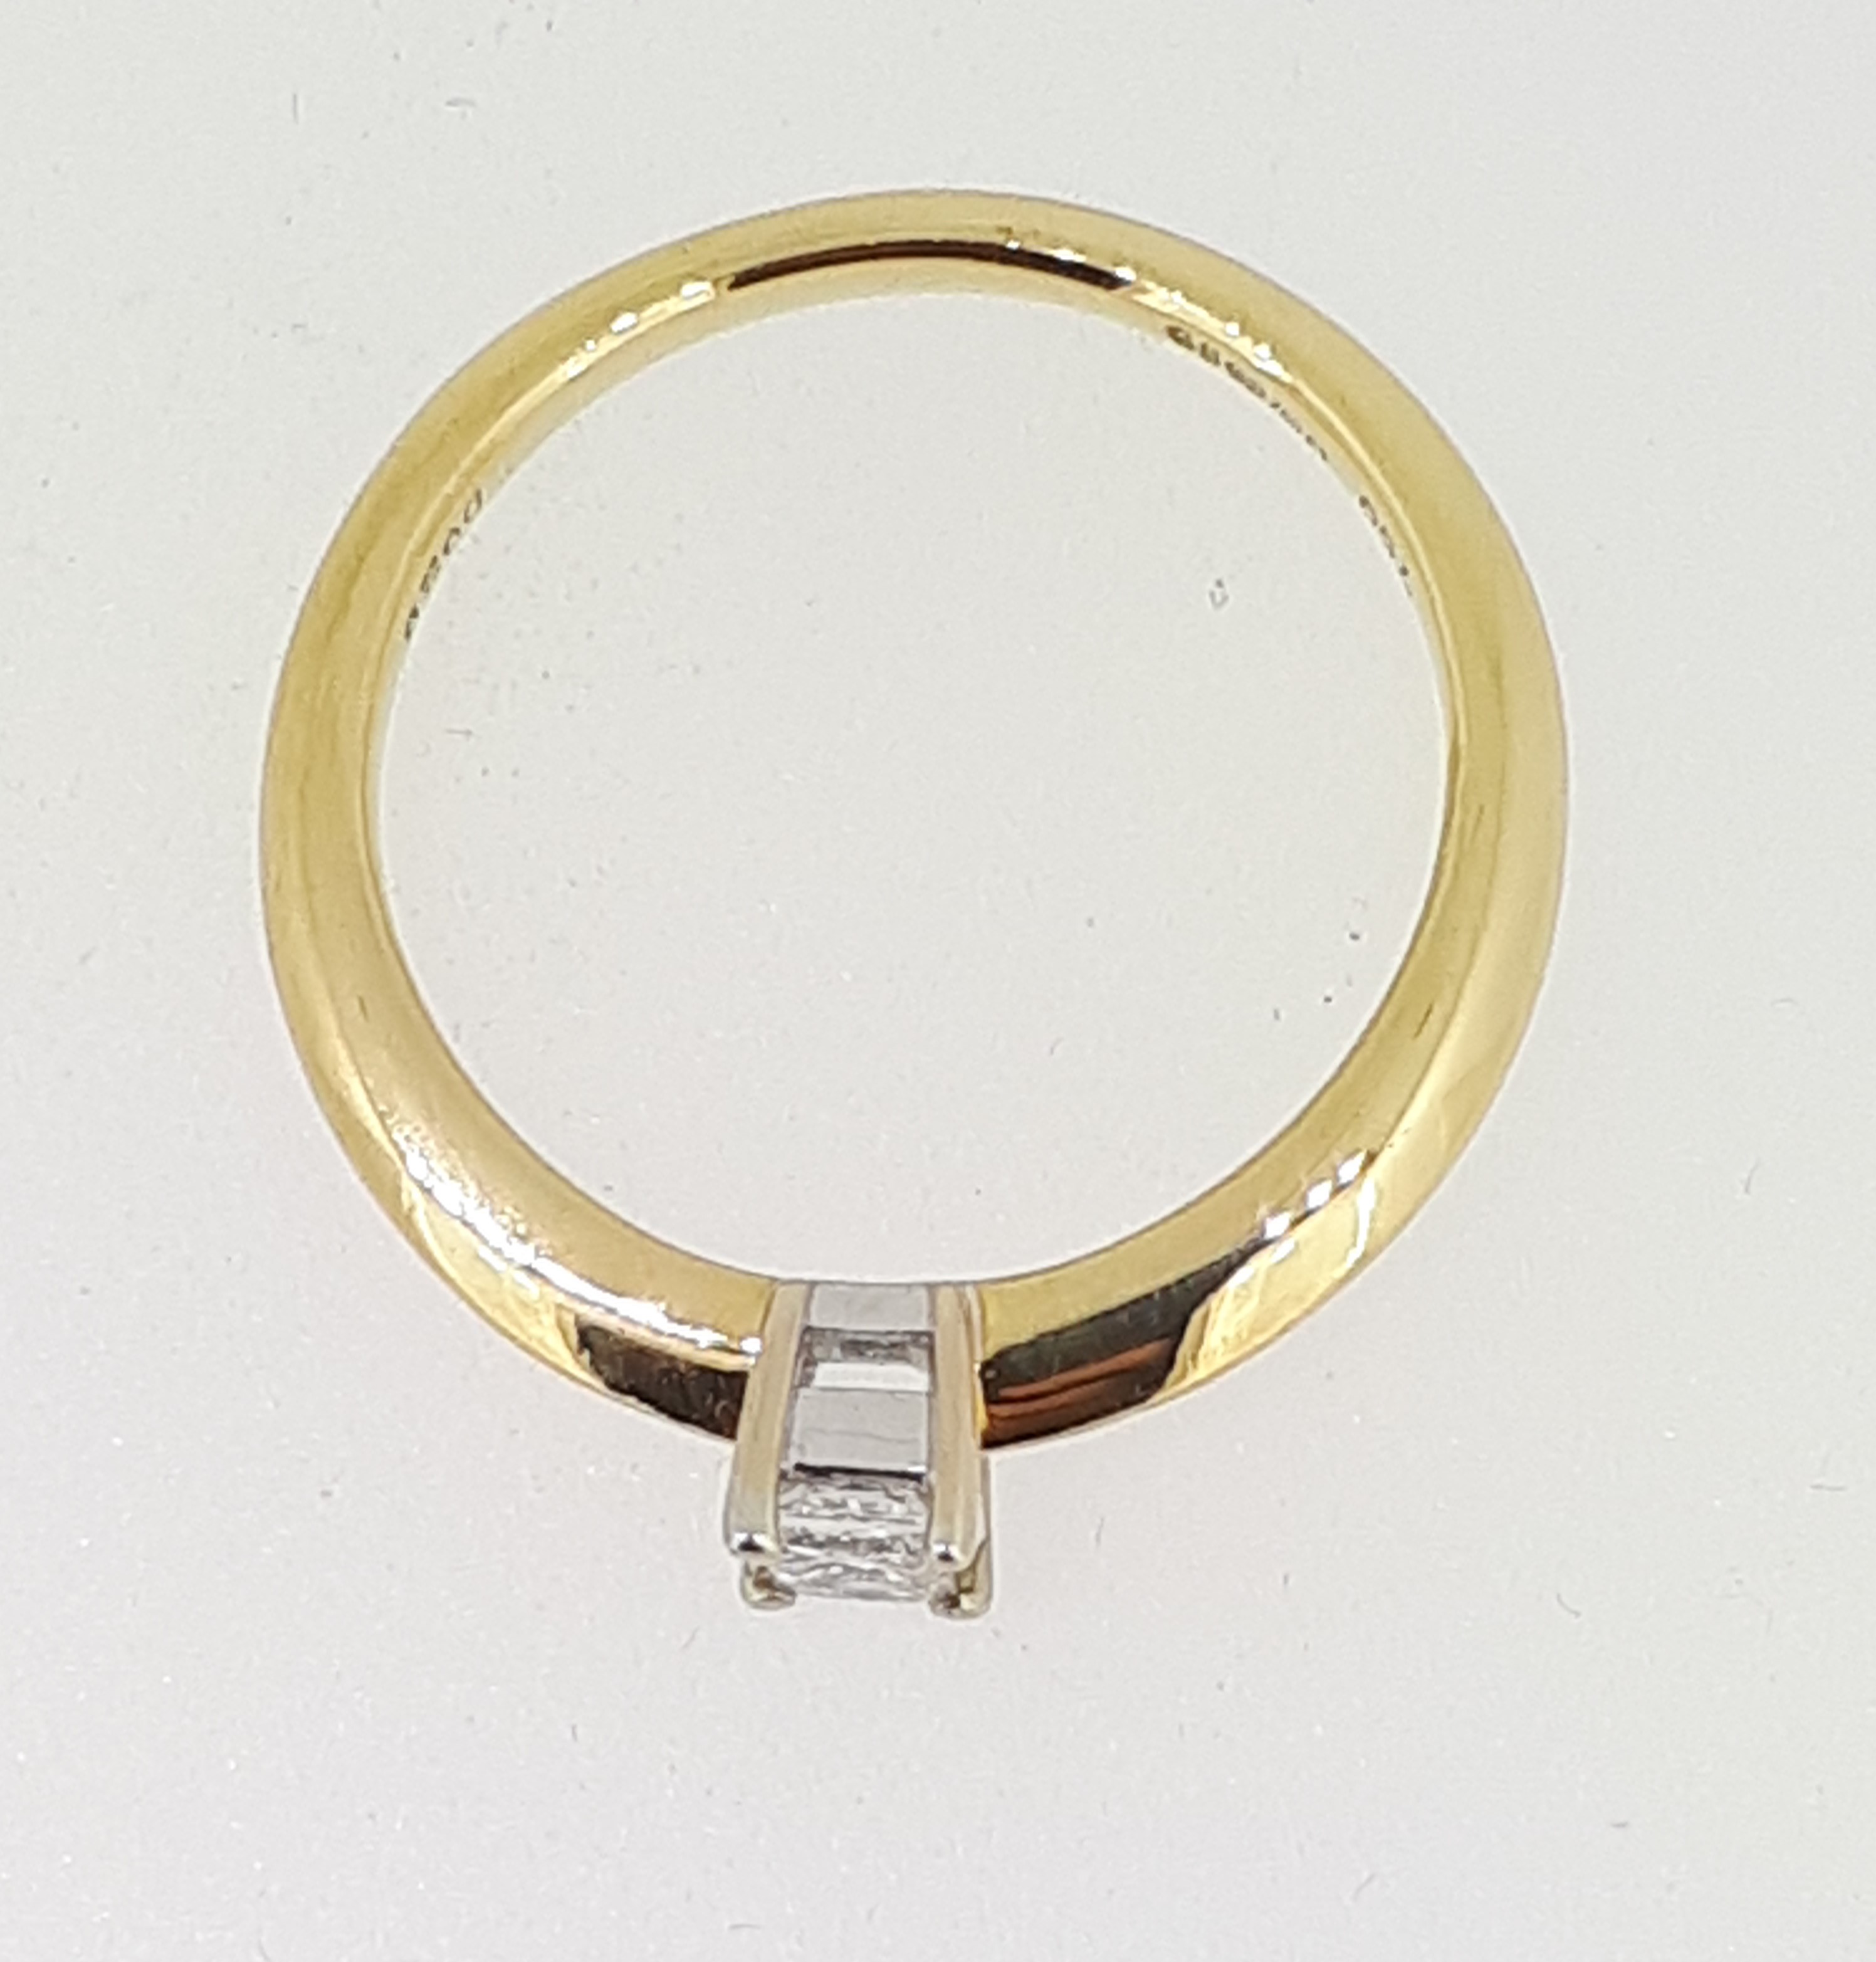 18ct (750) Yellow Gold 0.20ct Princess Cut Four Claw Solitaire Ring - Image 5 of 6